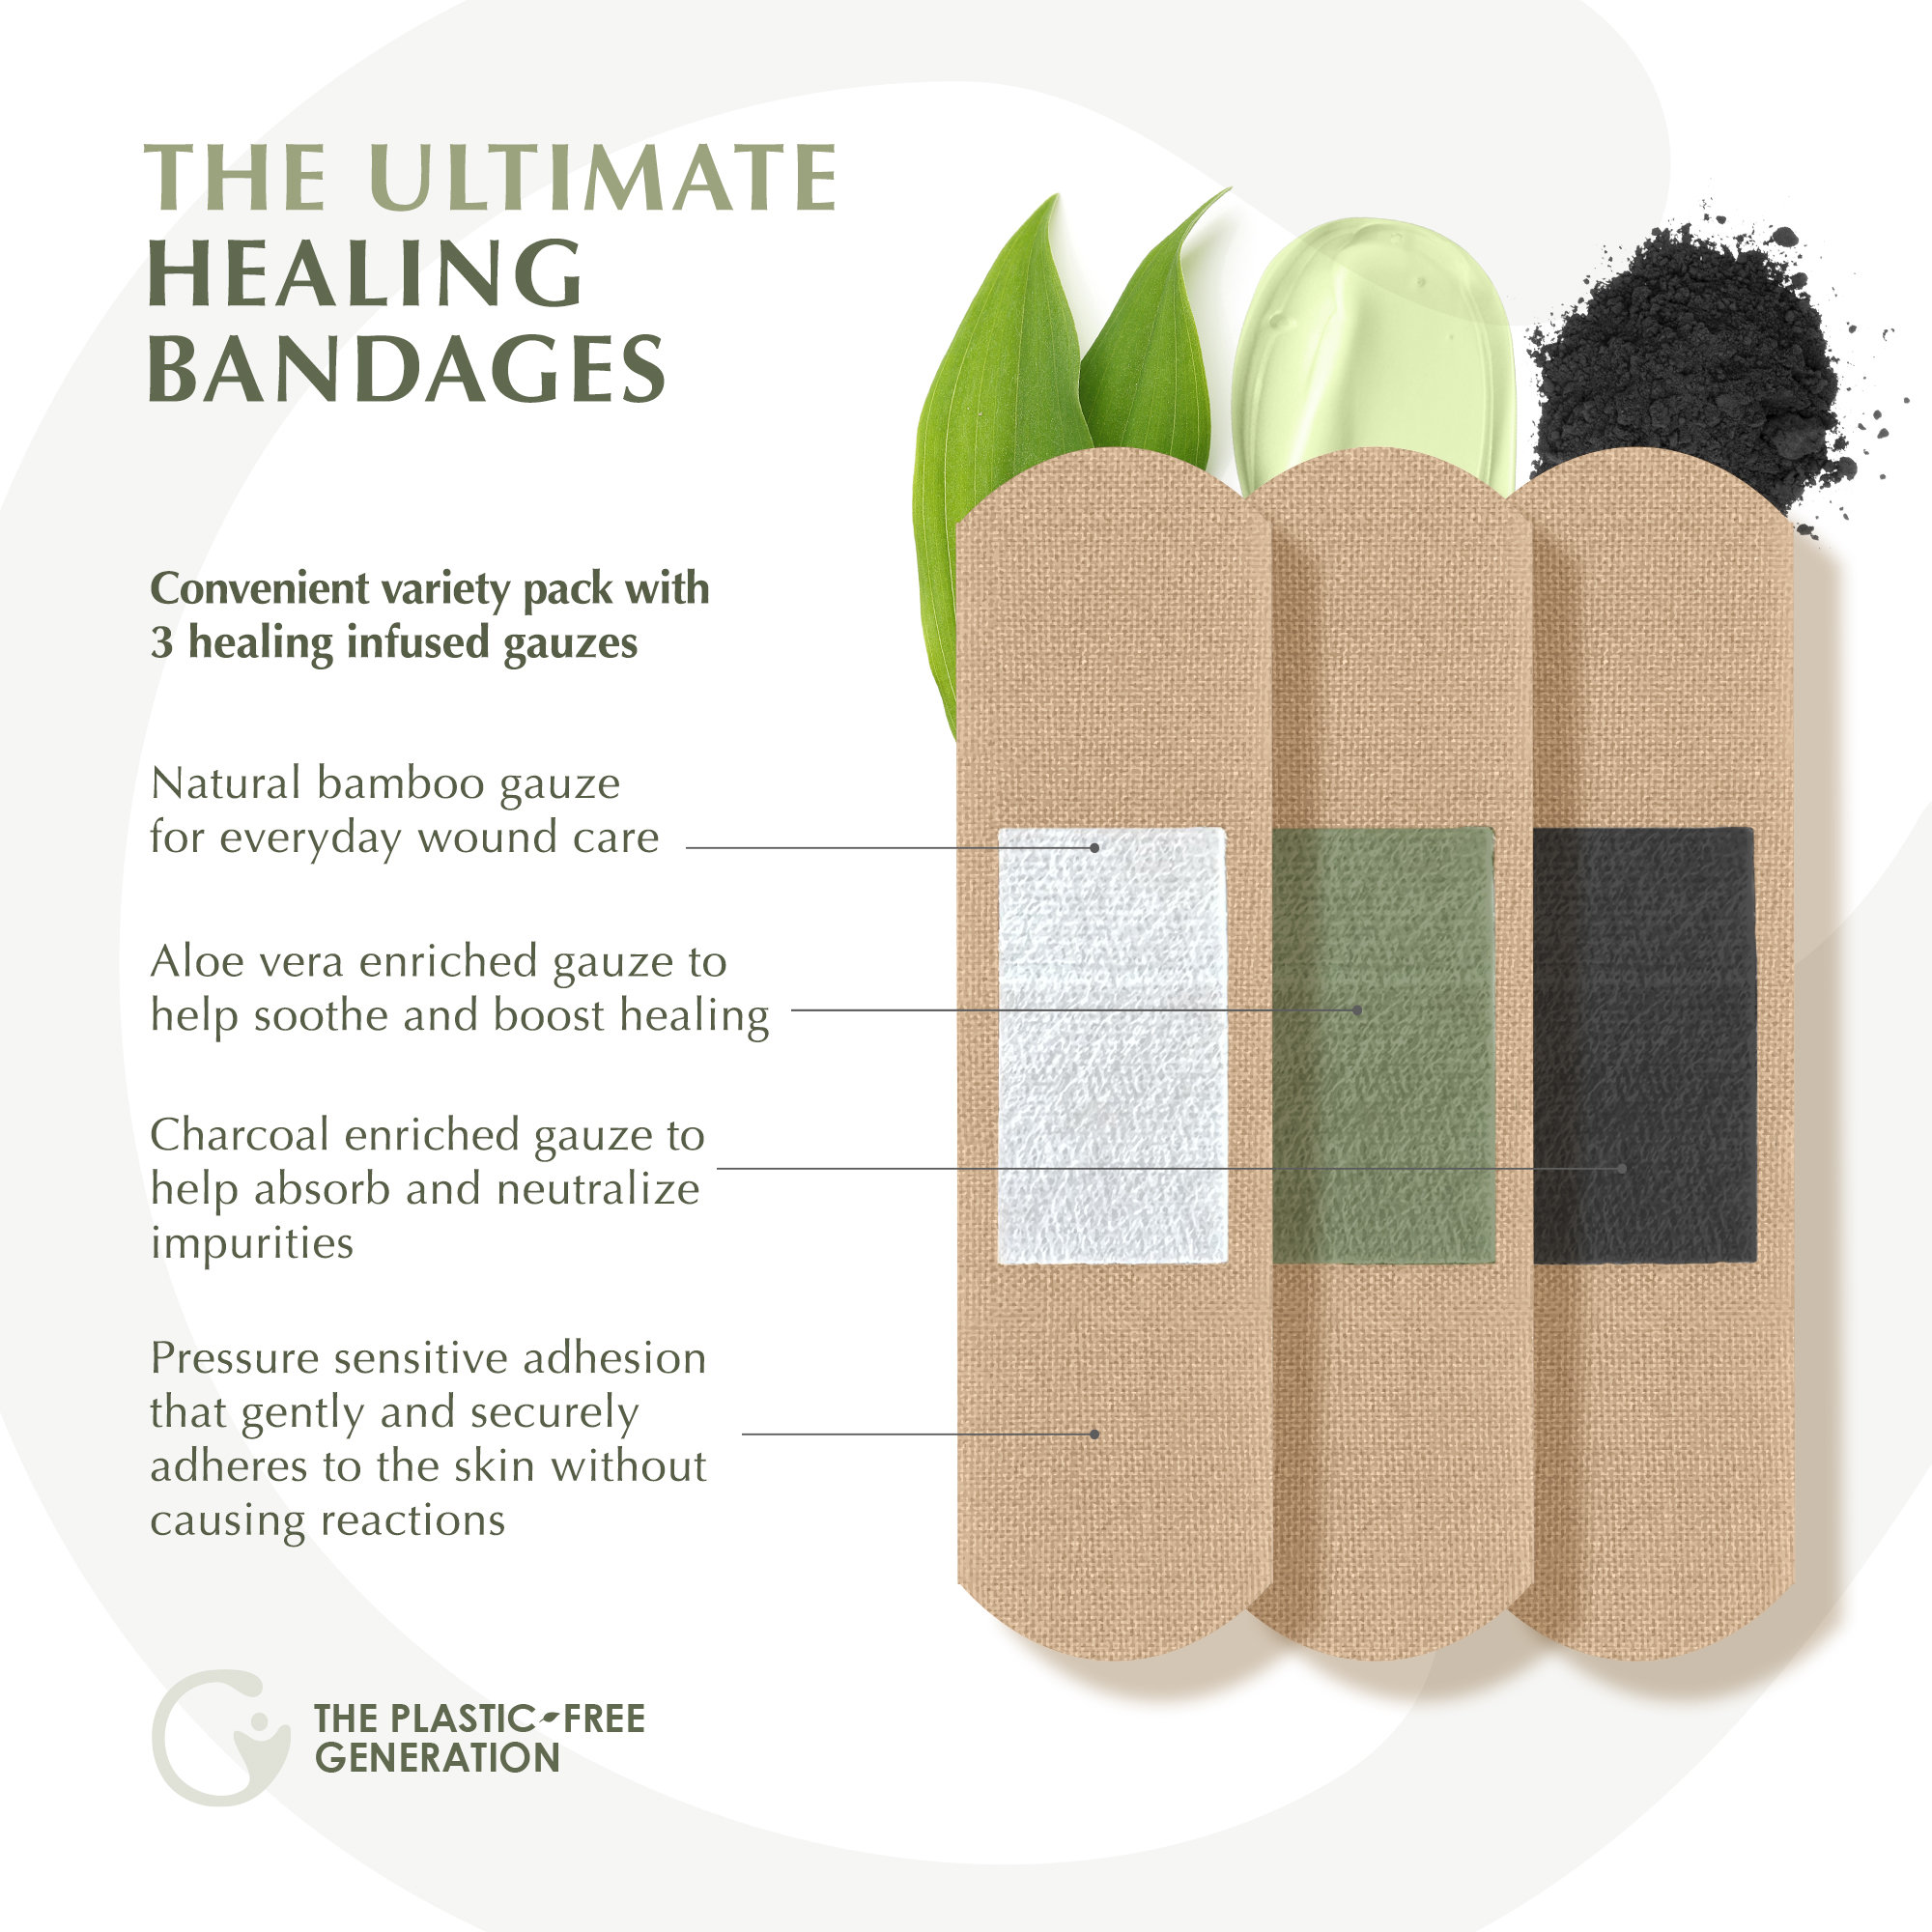 The Plant-based Bandage by Generation for Change 75 Organic Bamboo Bandages  Variety Pack Aloe, Charcoal & Natural Bamboo Compostable 